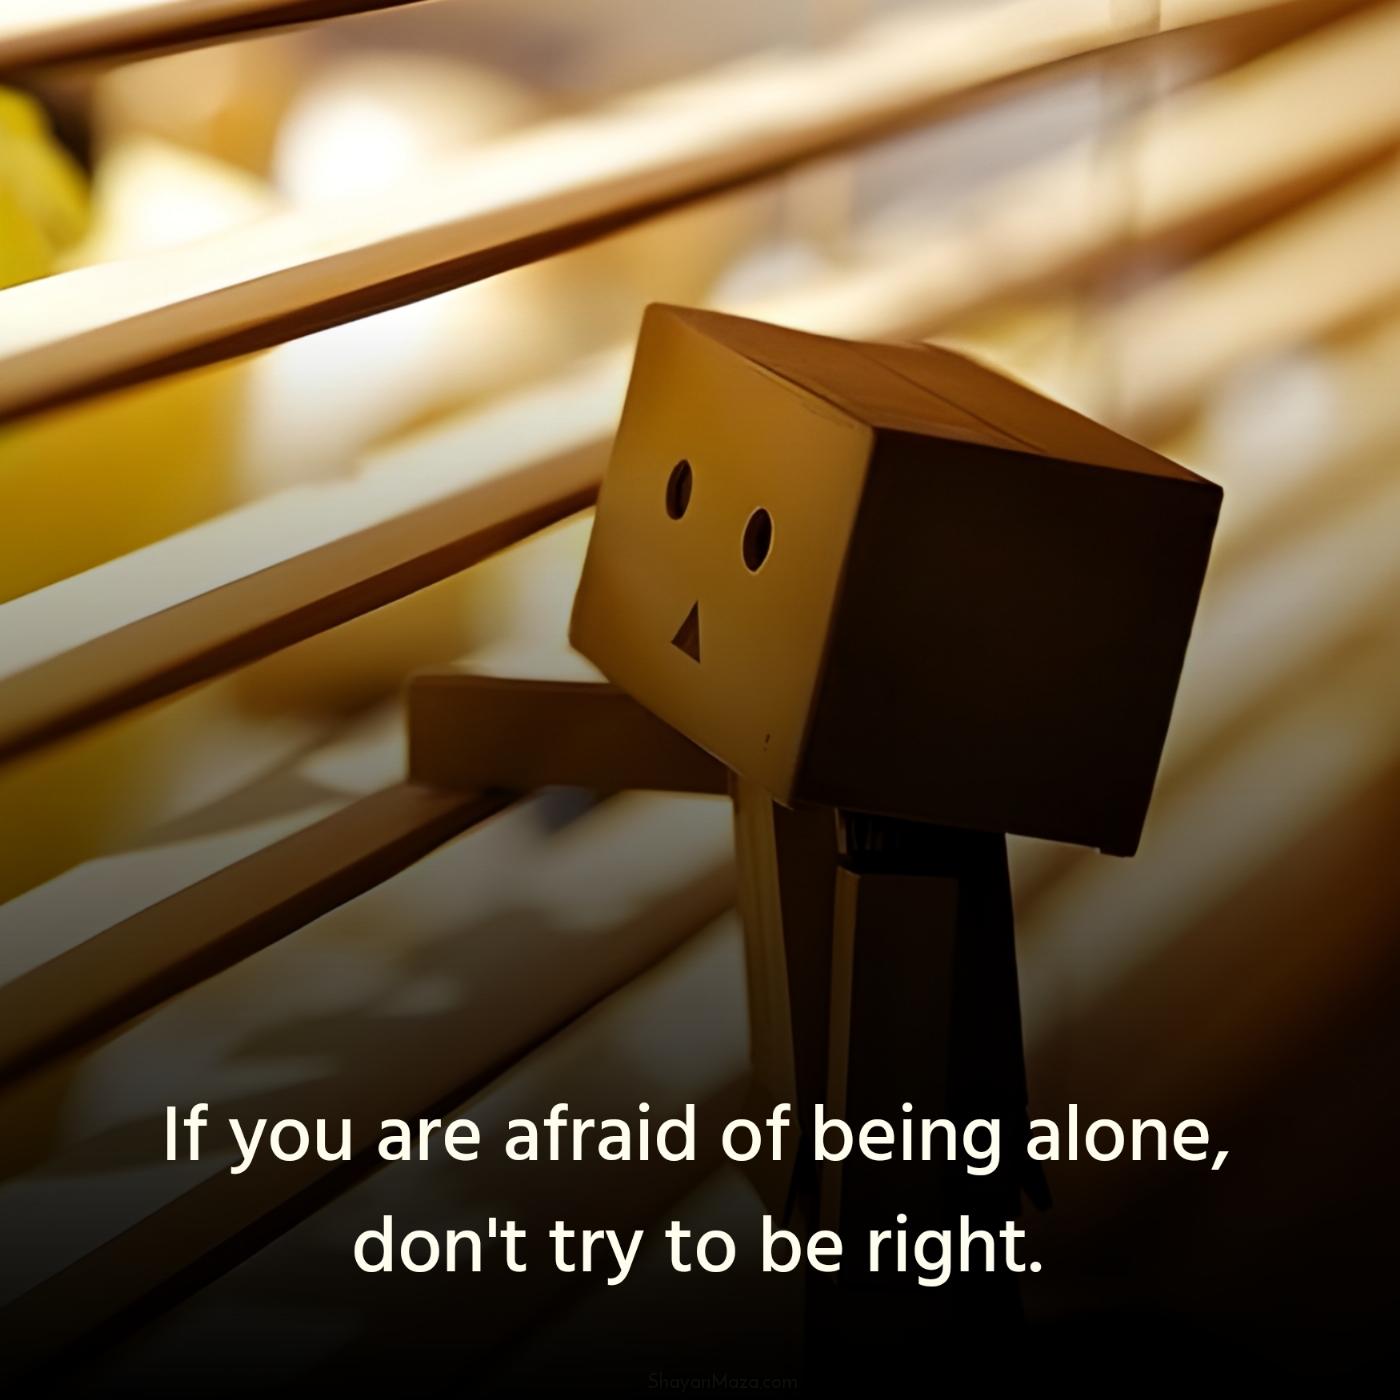 If you are afraid of being alone don't try to be right